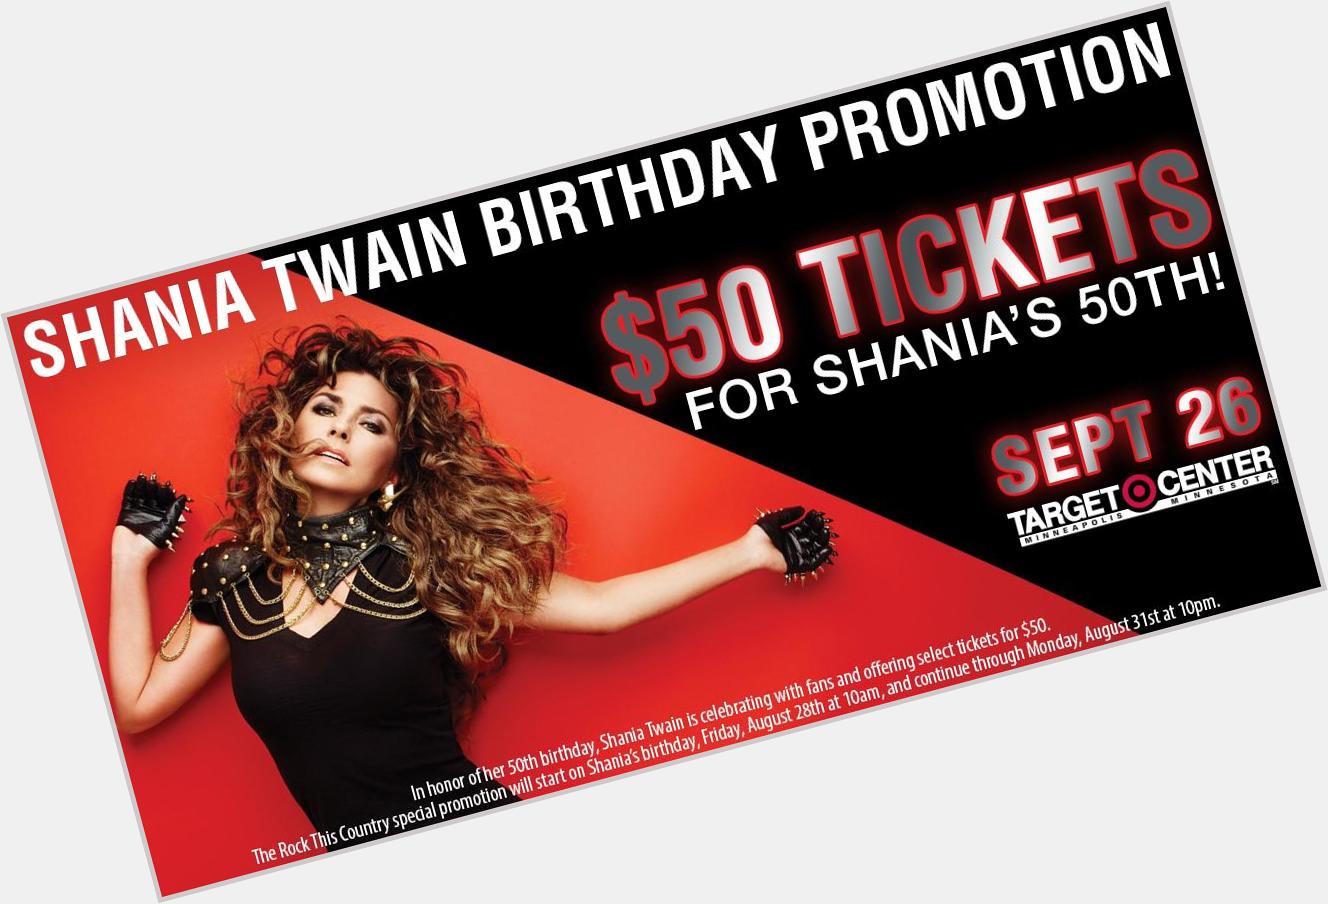 Happy birthday $50 tickets THIS WEEKEND ONLY in honor of your 50th! Tickets at  